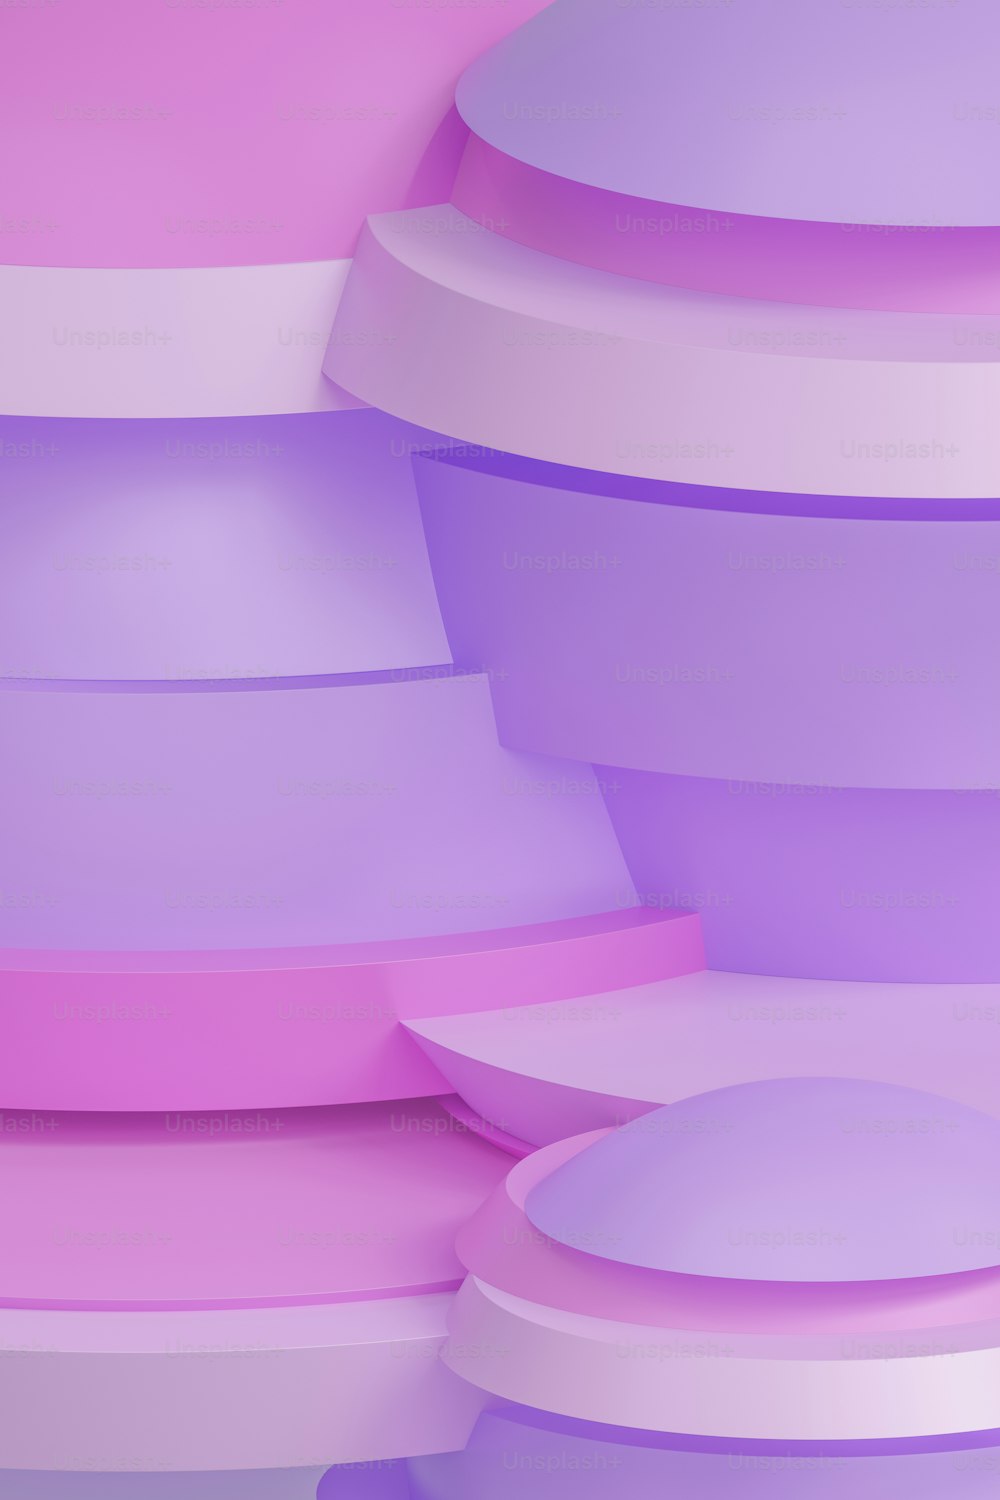 a purple and pink abstract background with curved shapes